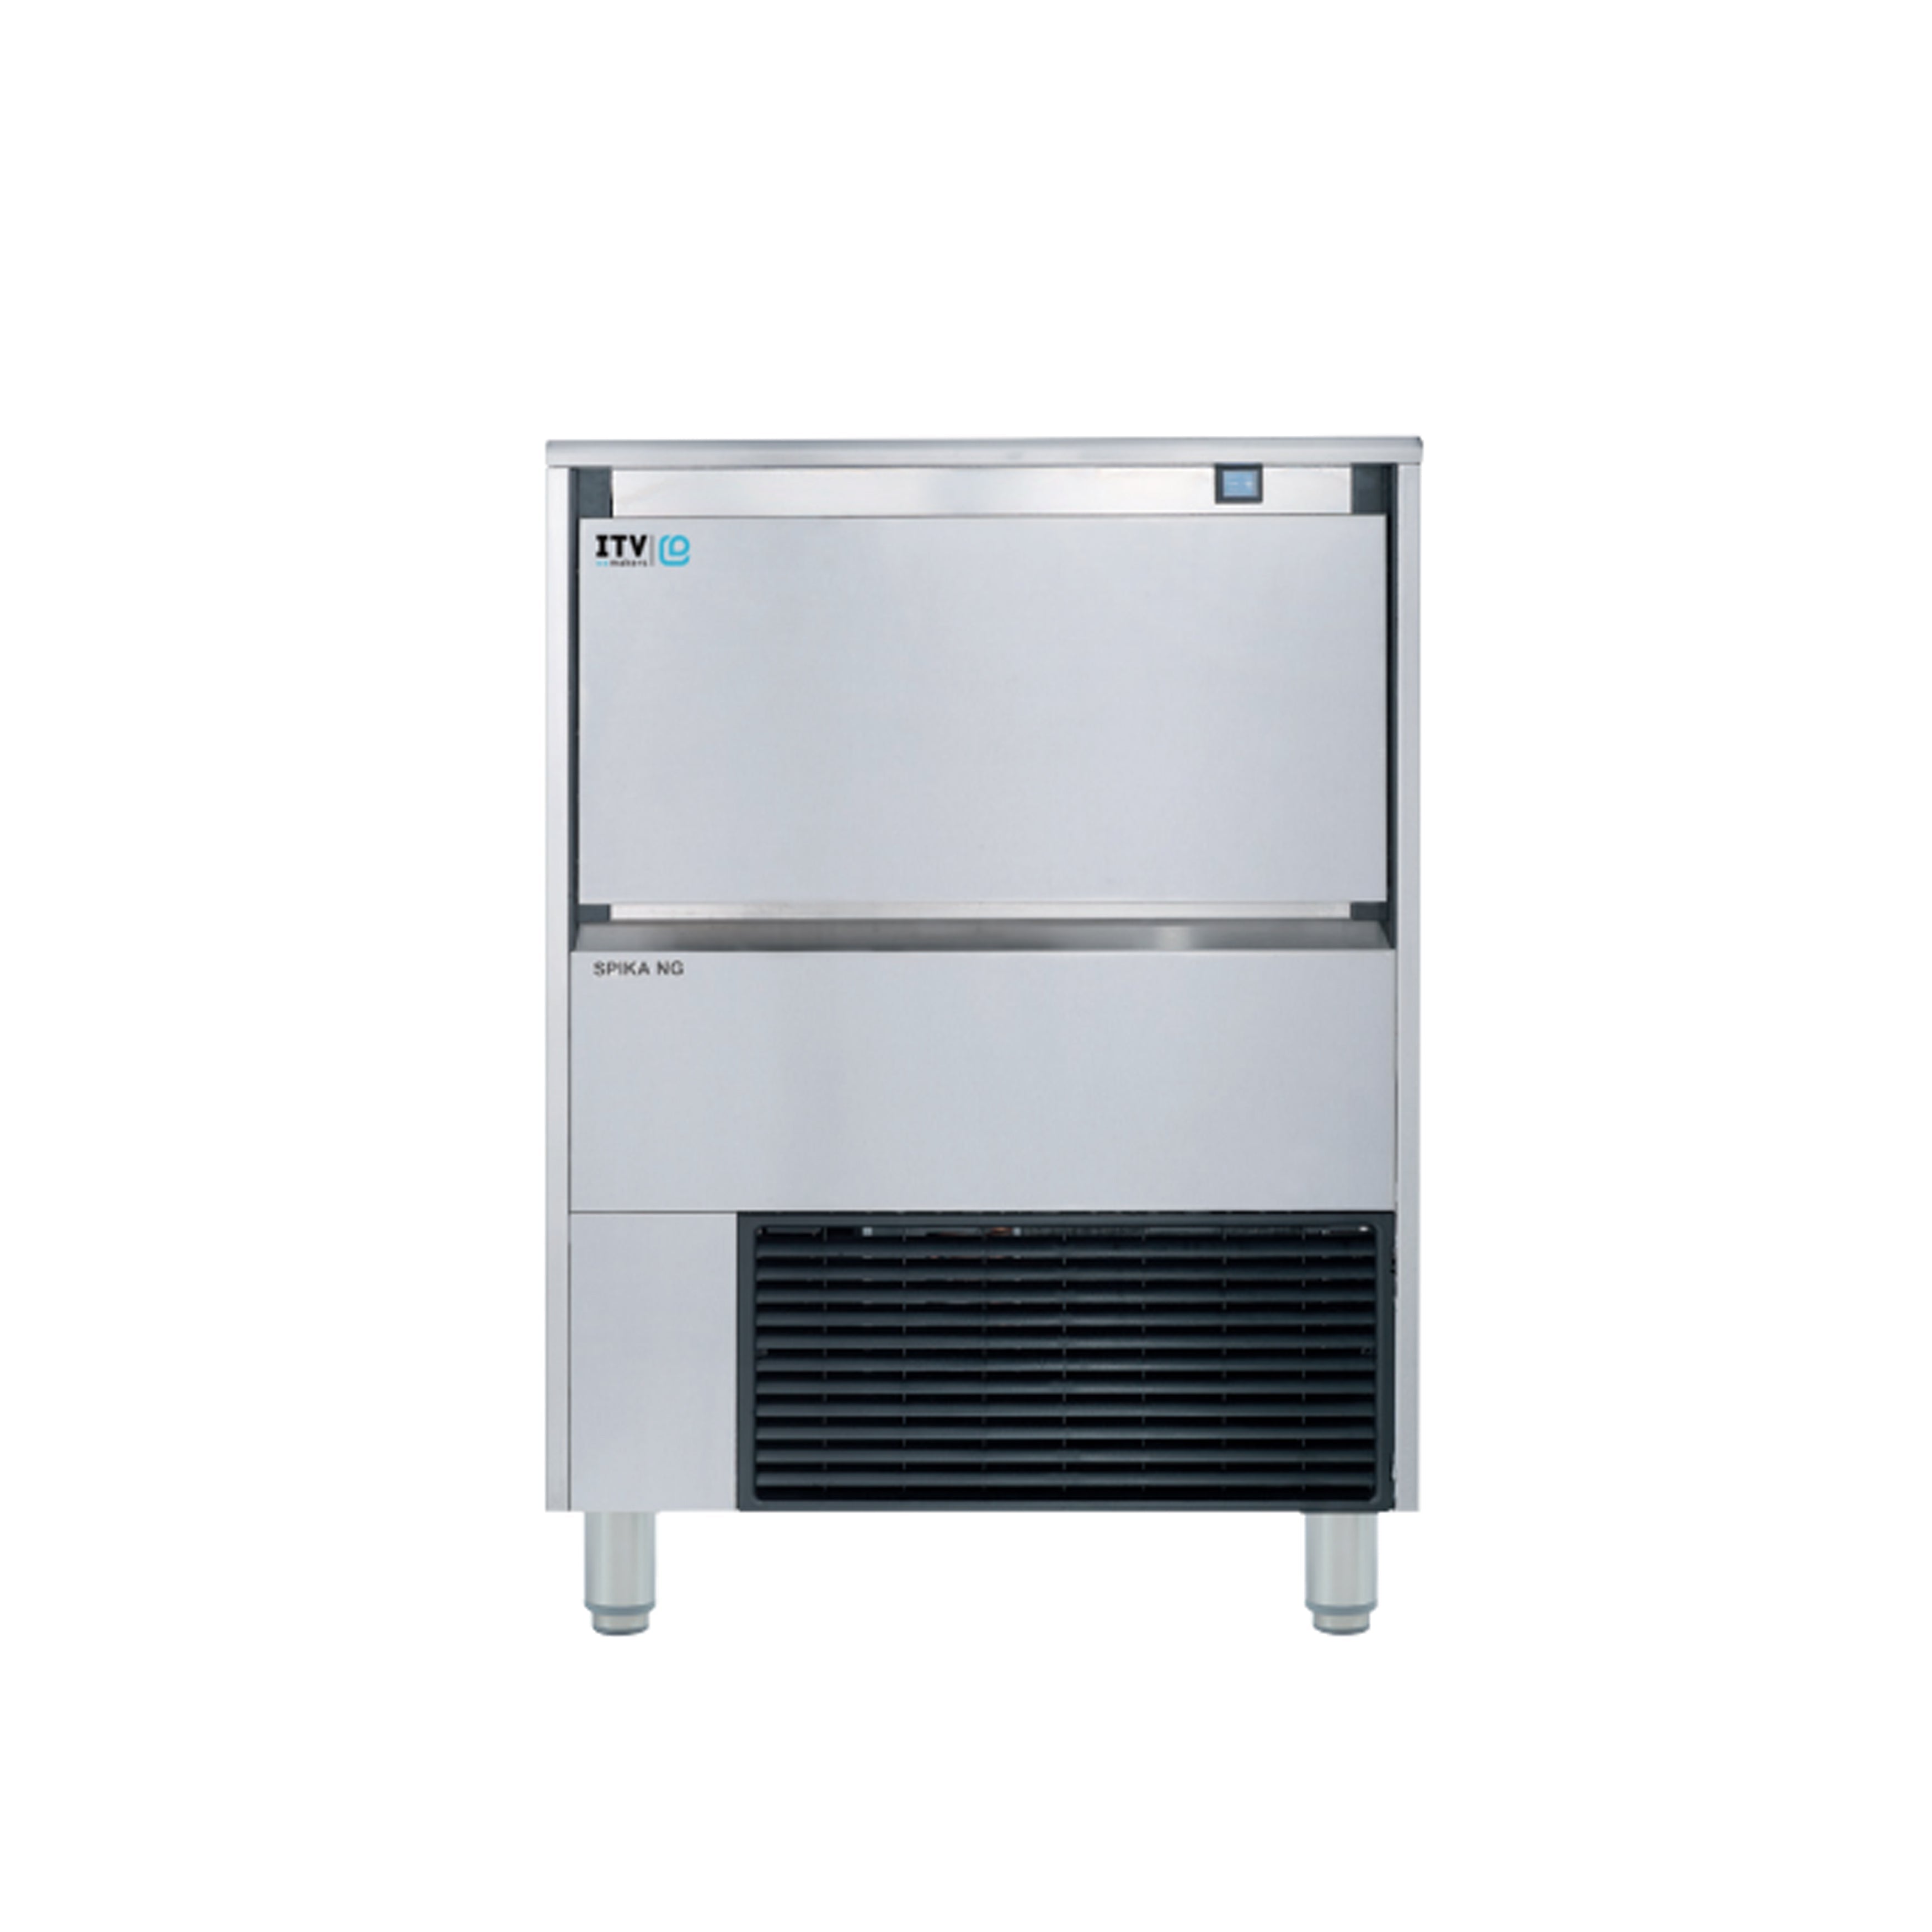 ITV - SPIKA NG 230W, Commercial Spika Cubers under-counter Ice Maker Self-Contained Ice Cube Machine 231lbs